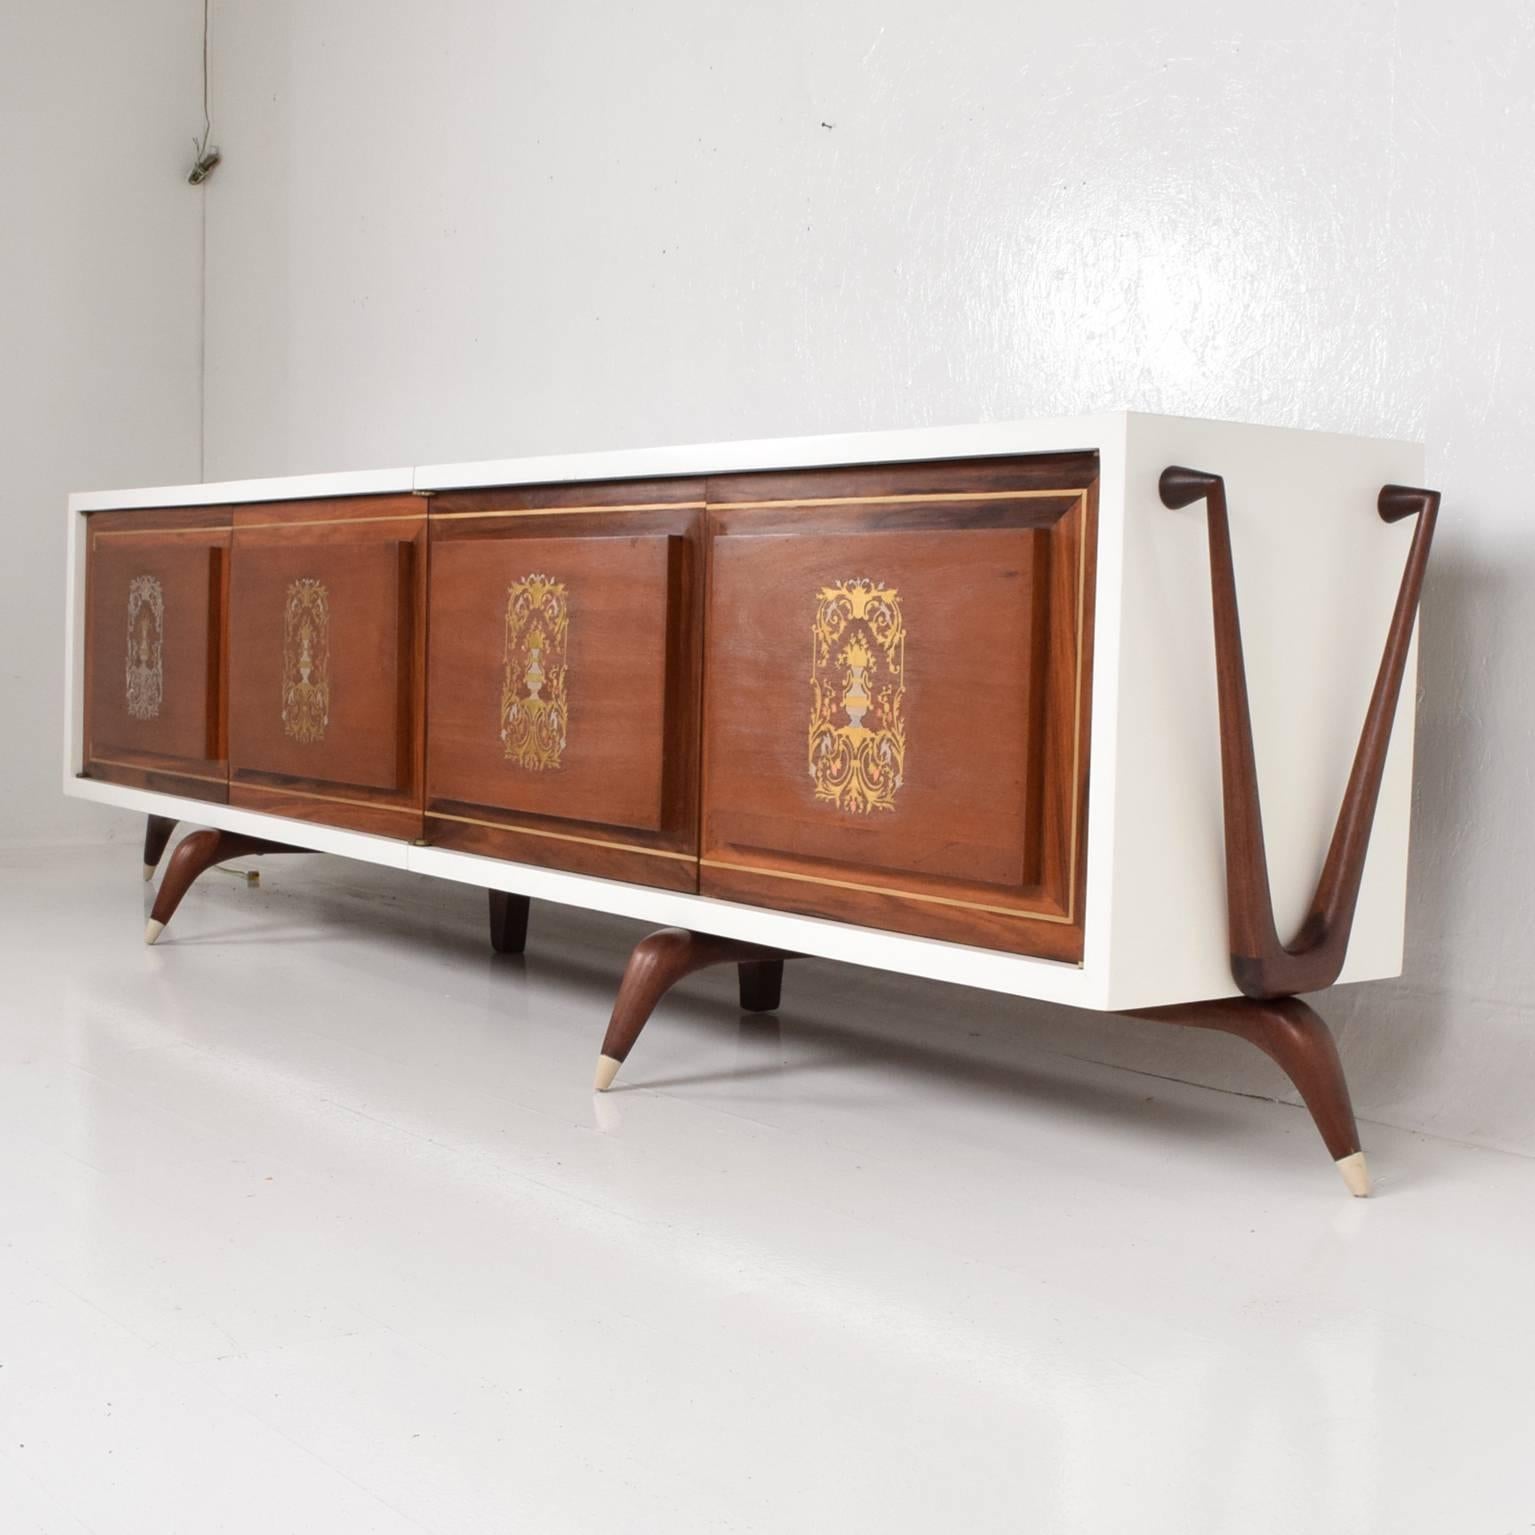 For your consideration, a stunning monumental custom made sculptural credenza.
Mexican mahogany, lacquer, goatskin parchment and brass copper and aluminium inlay.
Measures: 130